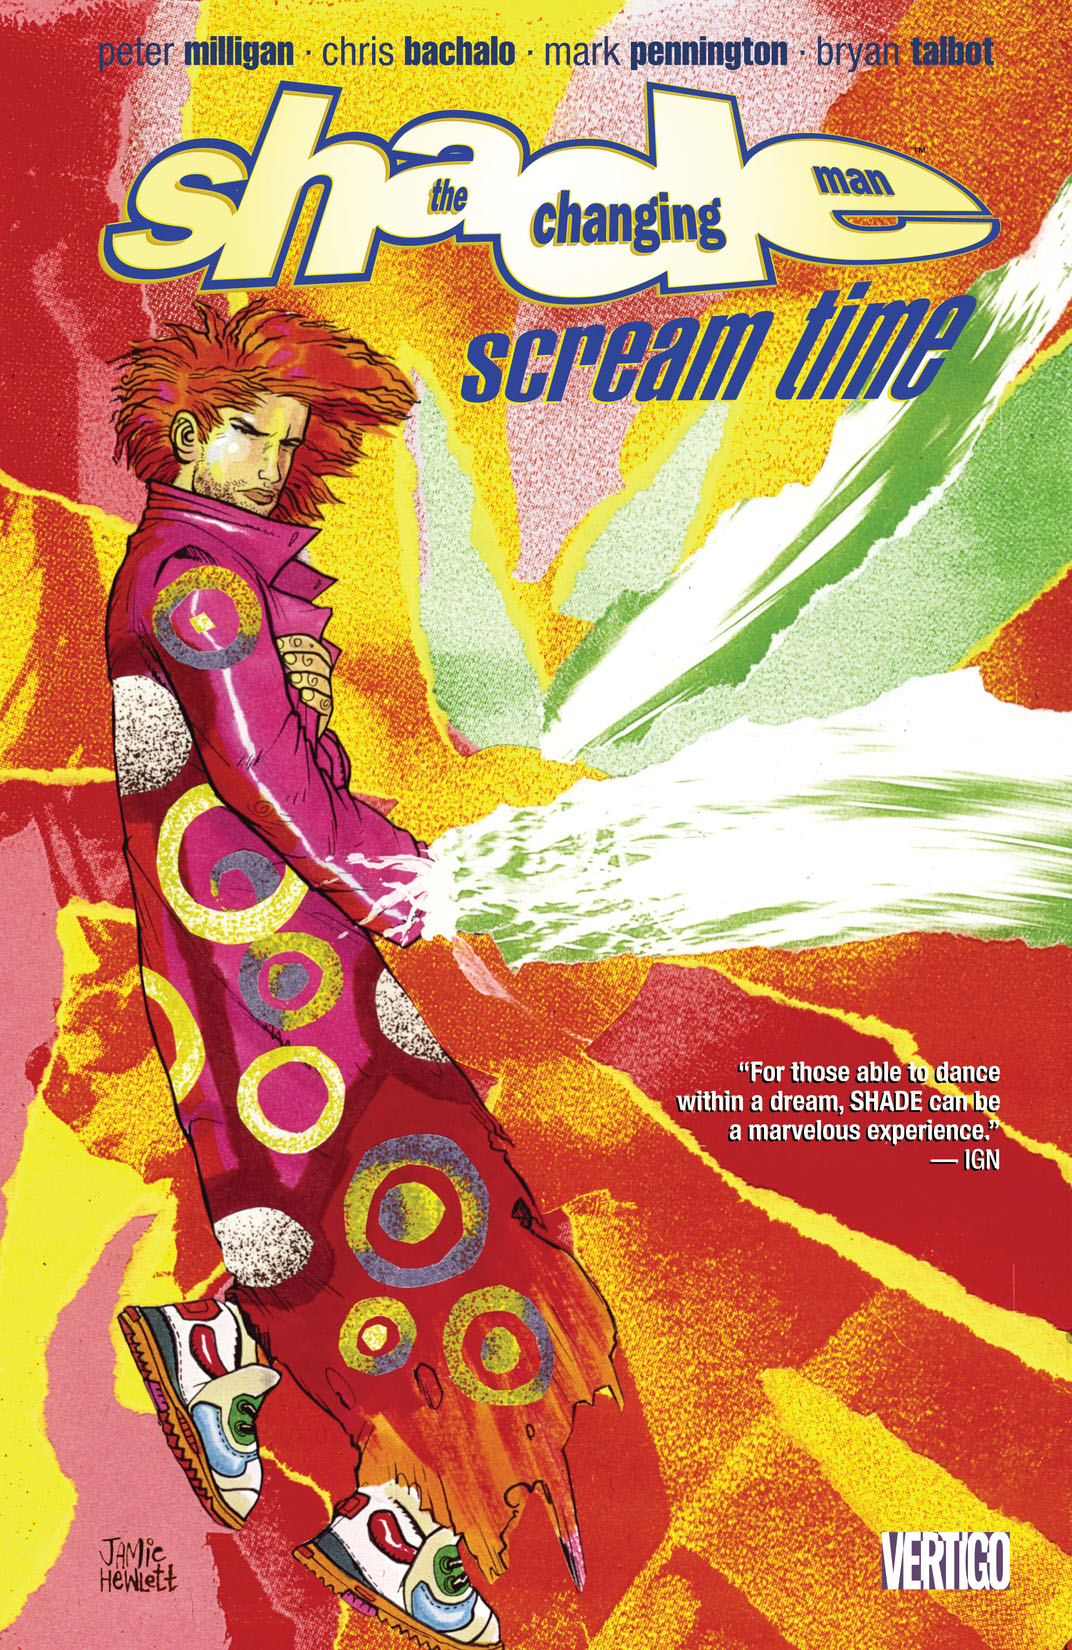 Shade the Changing Man Vol. 3: Scream Time preview images